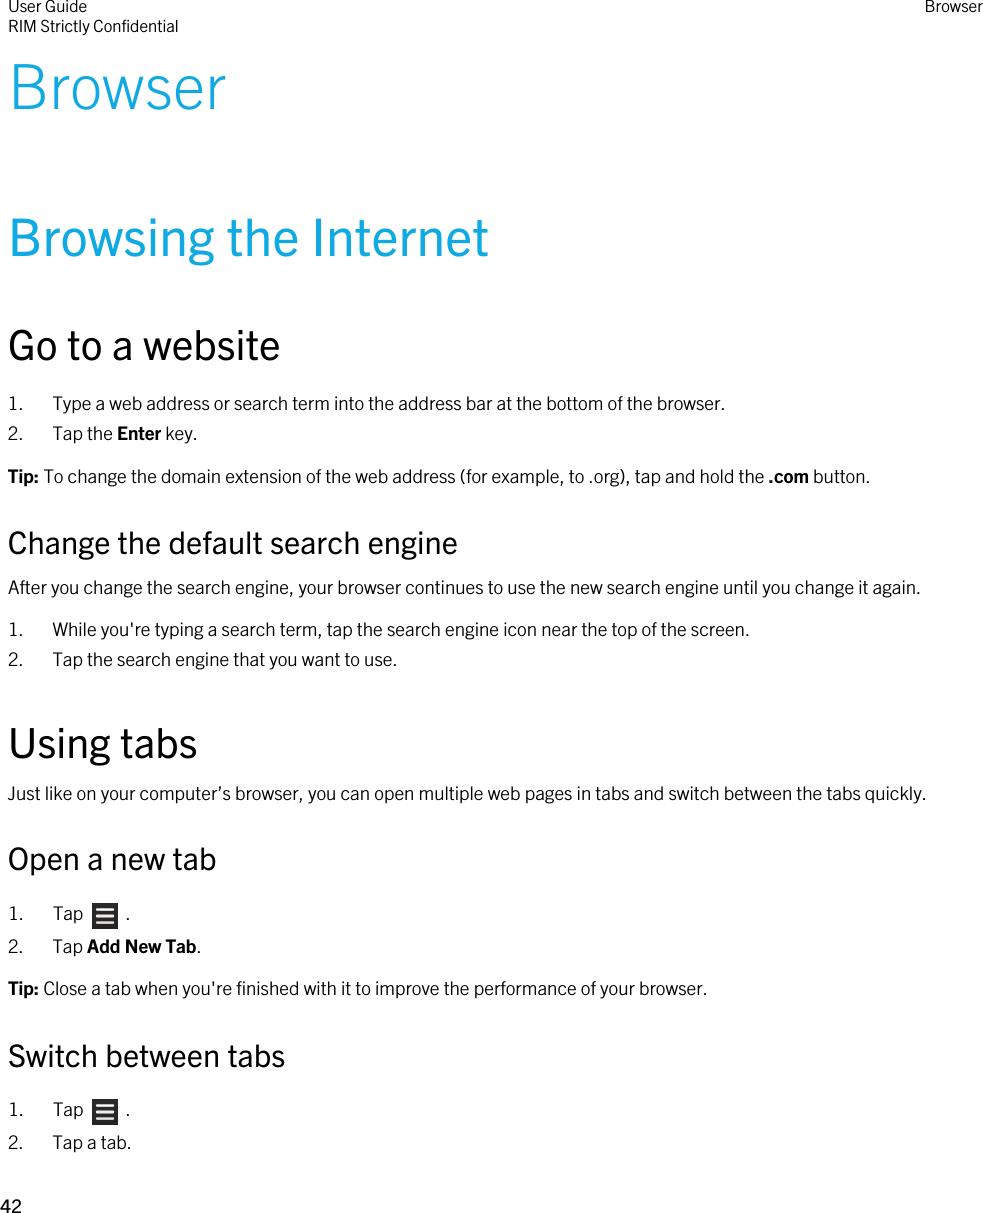 BrowserBrowsing the InternetGo to a website1. Type a web address or search term into the address bar at the bottom of the browser.2. Tap the Enter key.Tip: To change the domain extension of the web address (for example, to .org), tap and hold the .com button.Change the default search engineAfter you change the search engine, your browser continues to use the new search engine until you change it again.1. While you&apos;re typing a search term, tap the search engine icon near the top of the screen.2. Tap the search engine that you want to use.Using tabsJust like on your computer’s browser, you can open multiple web pages in tabs and switch between the tabs quickly.Open a new tab1.  Tap    .2. Tap Add New Tab.Tip: Close a tab when you&apos;re finished with it to improve the performance of your browser.Switch between tabs1.  Tap    .2. Tap a tab.User GuideRIM Strictly Confidential Browser42 